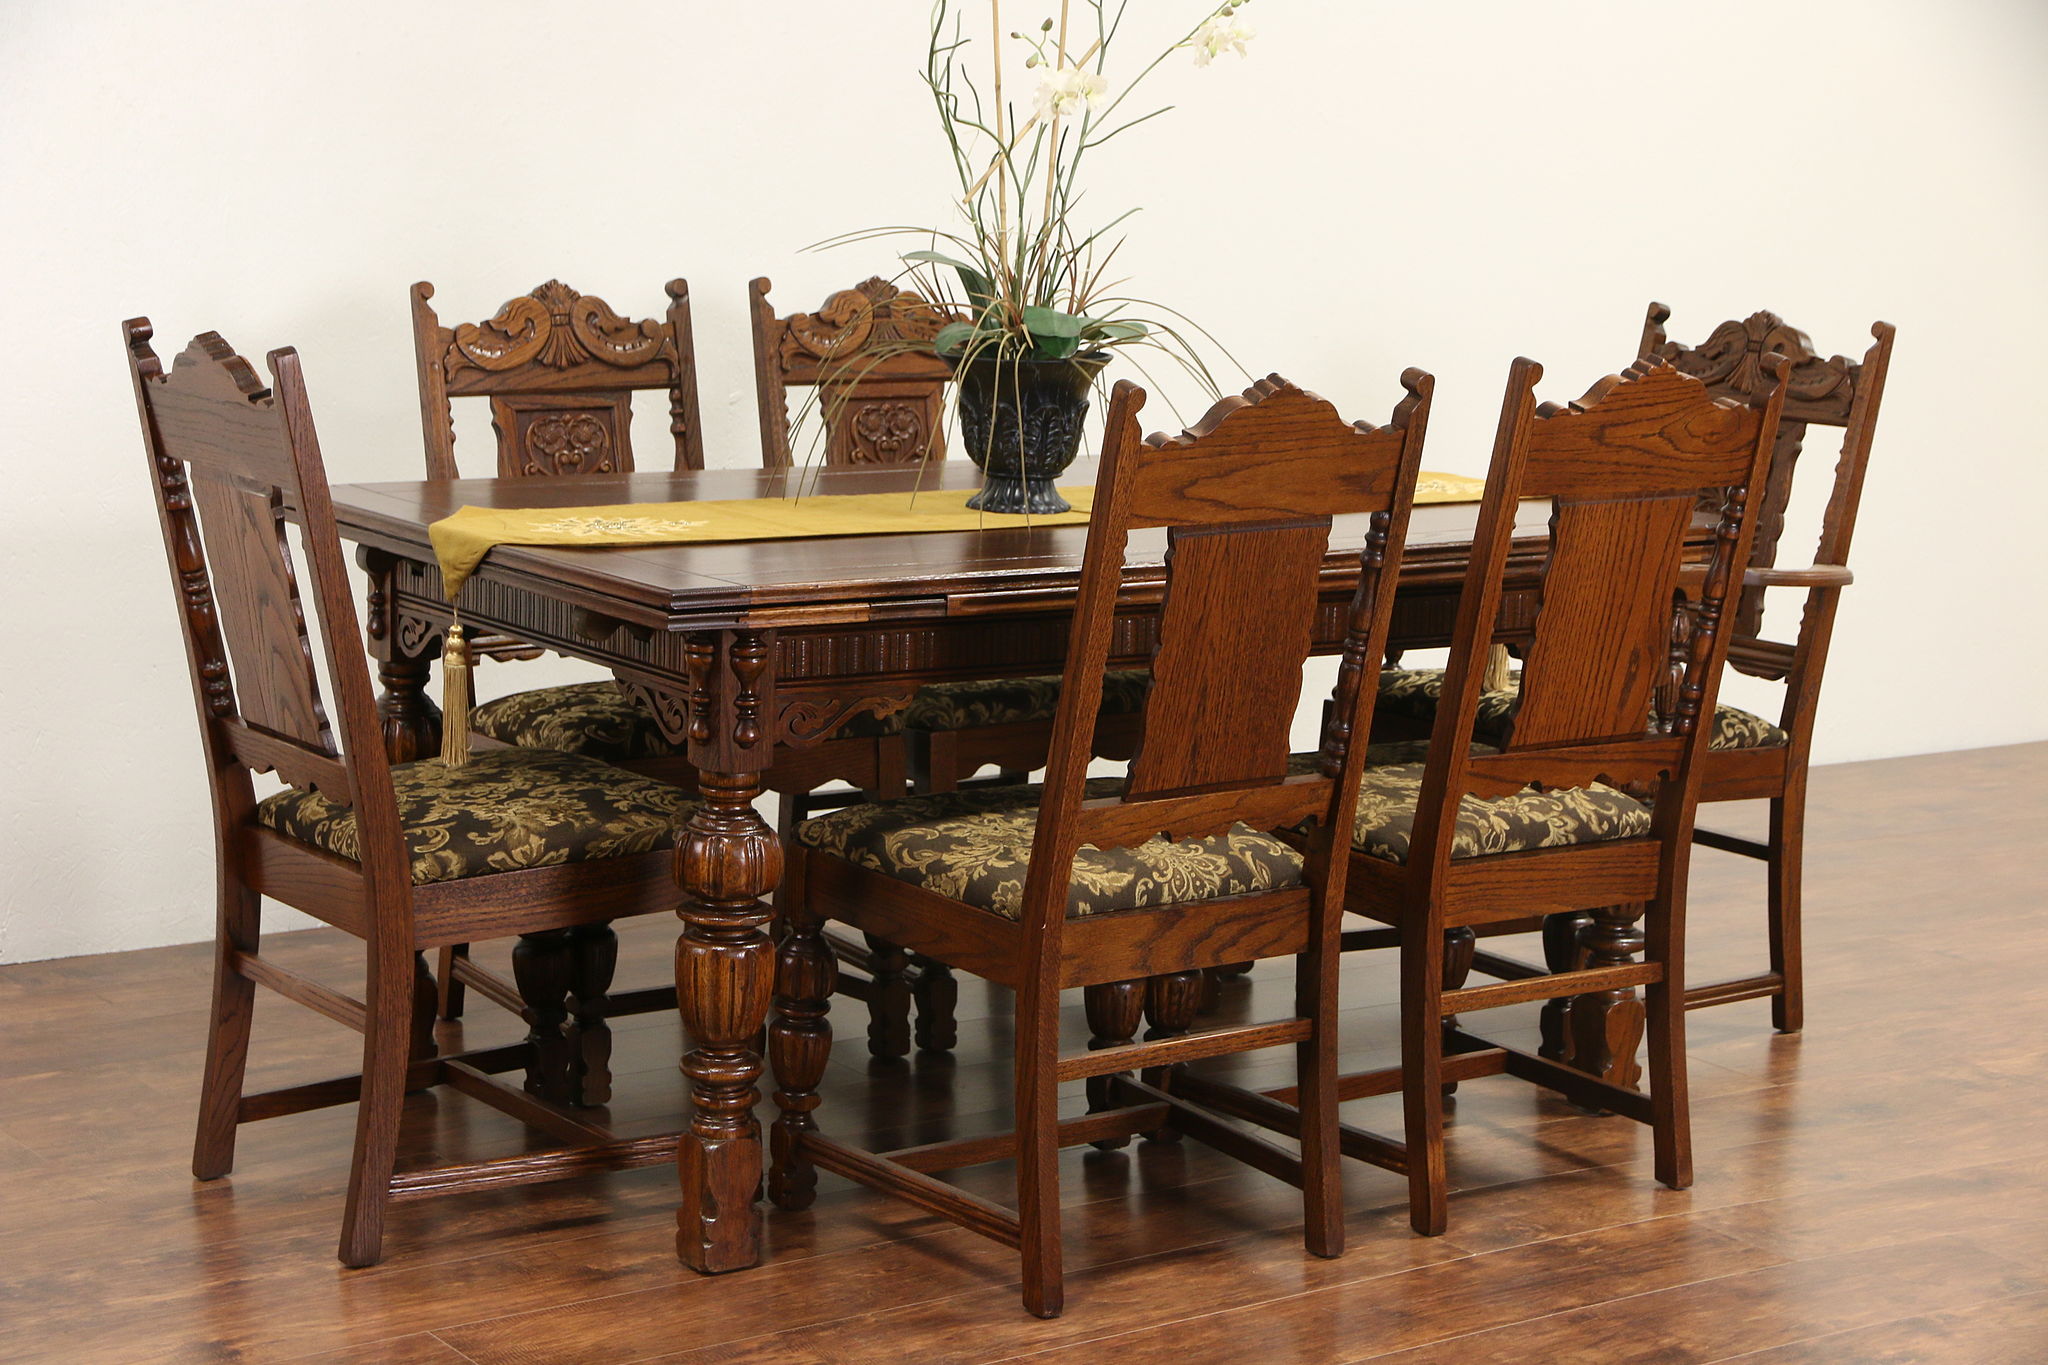 Sold English Tudor 1920 Antique Carved Oak Dining Set Table 6 Chairs Harp Gallery Antiques Furniture